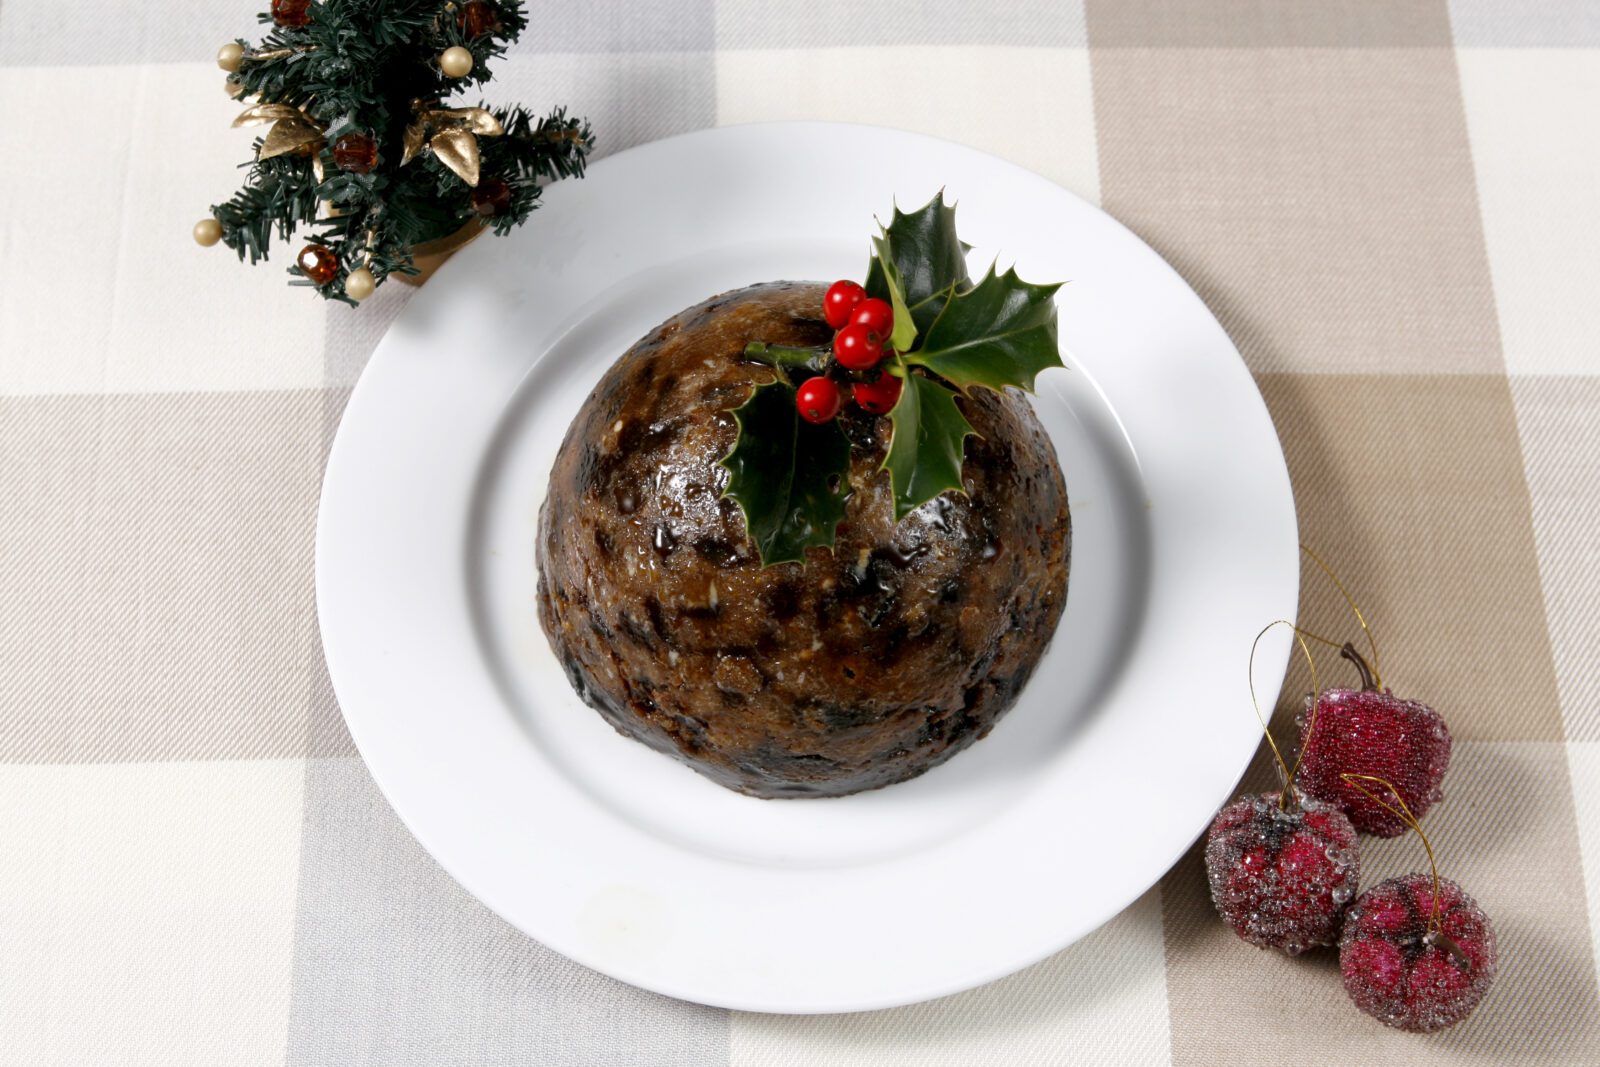 A traditional British Christmas steamed pudding decorate with holly served with custard